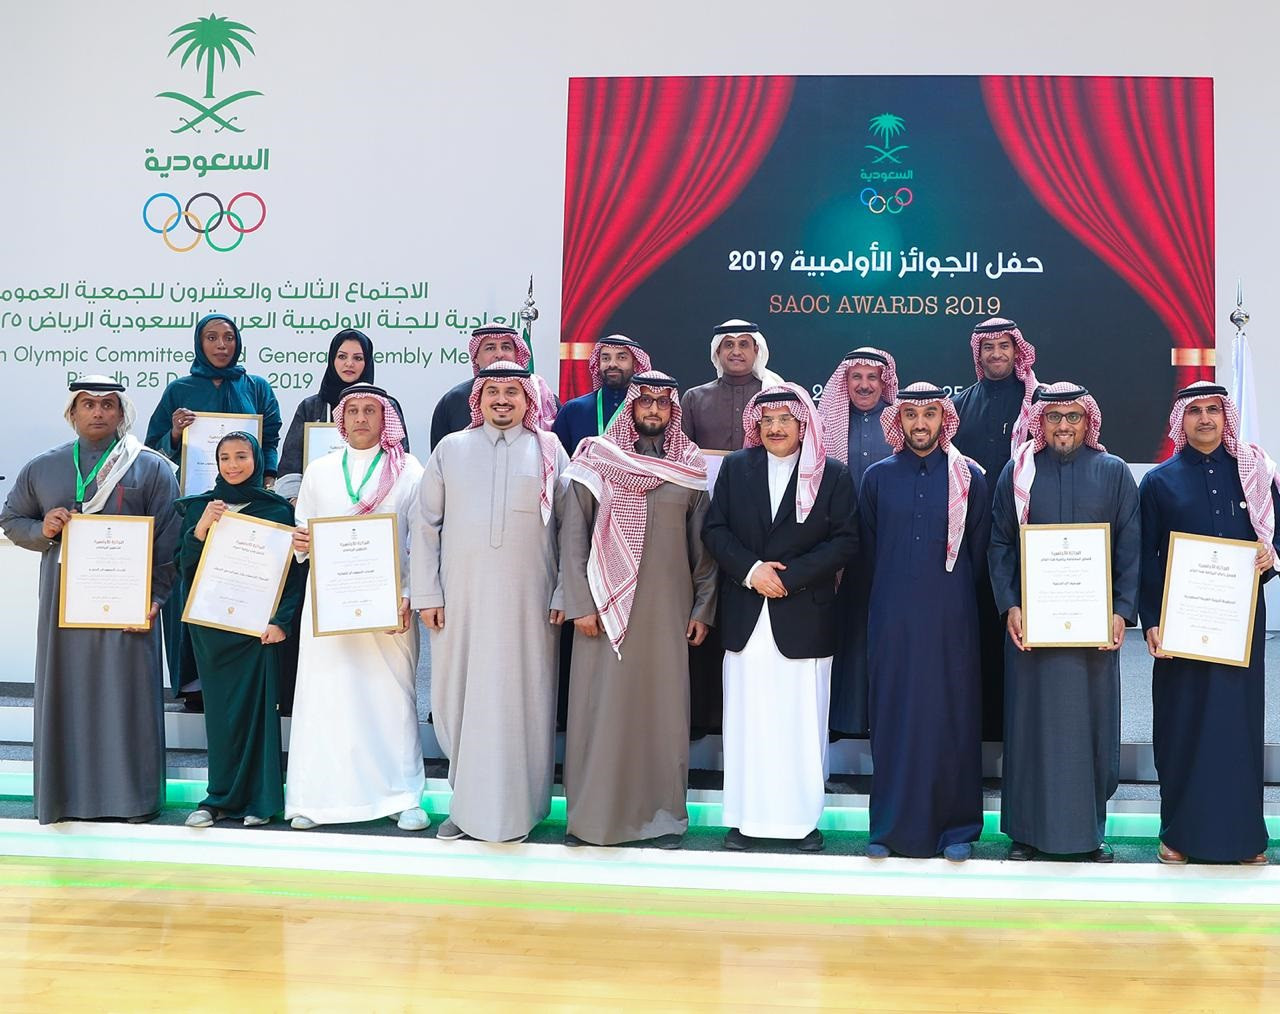 The Saudi Arabian Olympic Committee Awards have been held for the first time in Riyadh ©SAOC